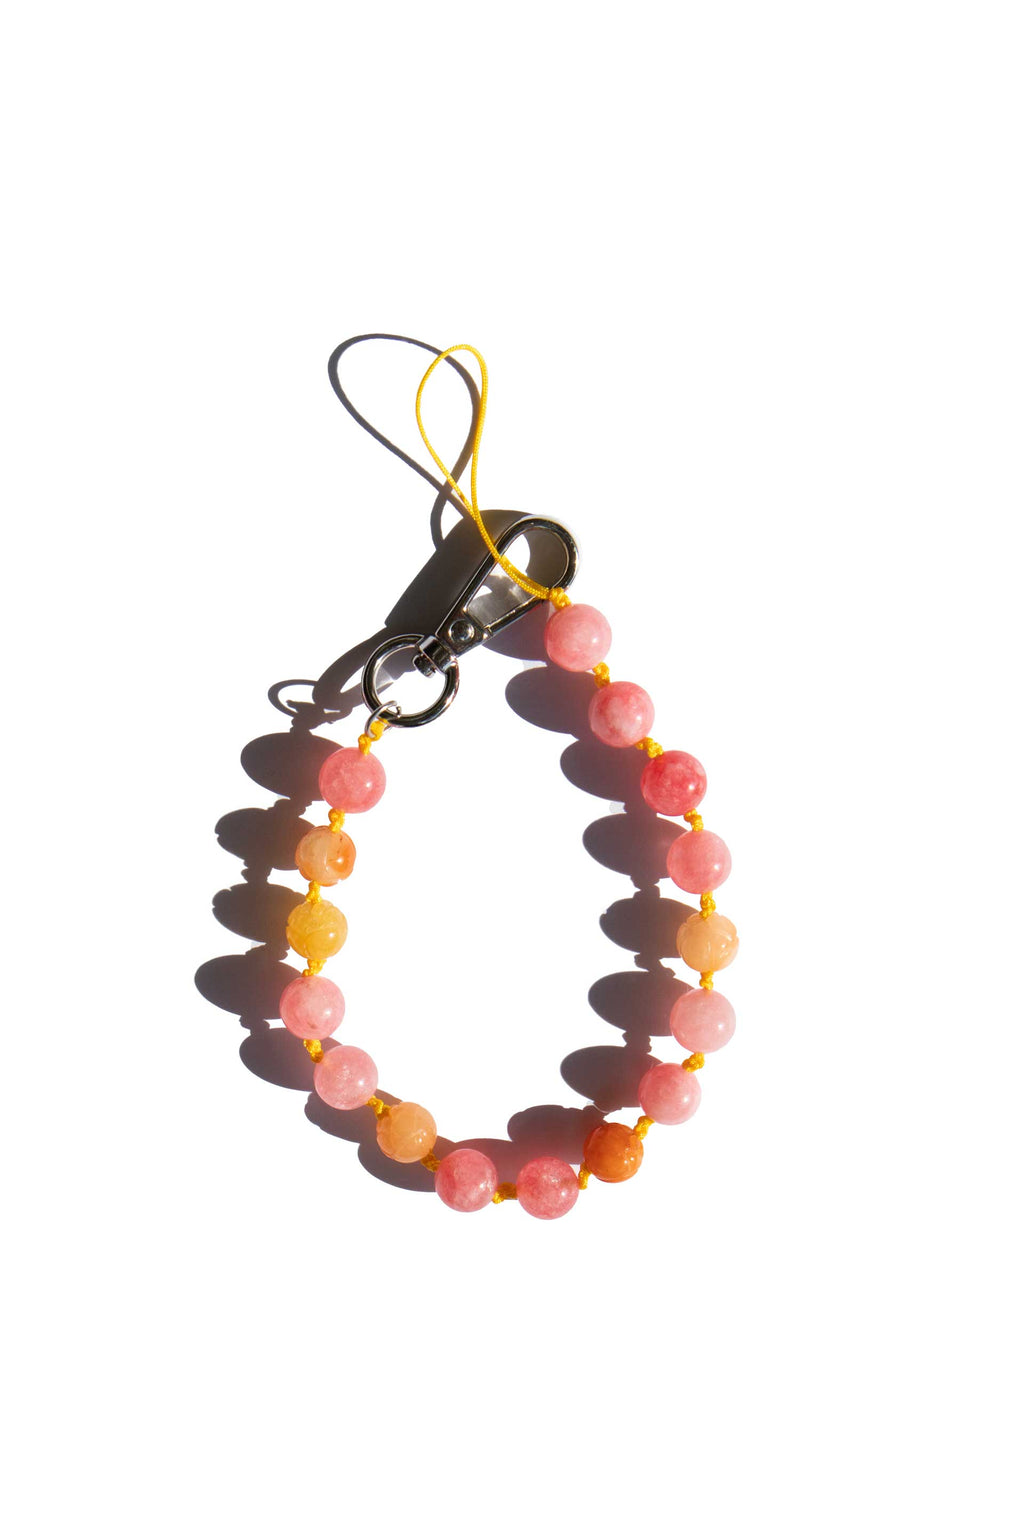 seree-rosy-phone-charm-in-peachy-pink-beads